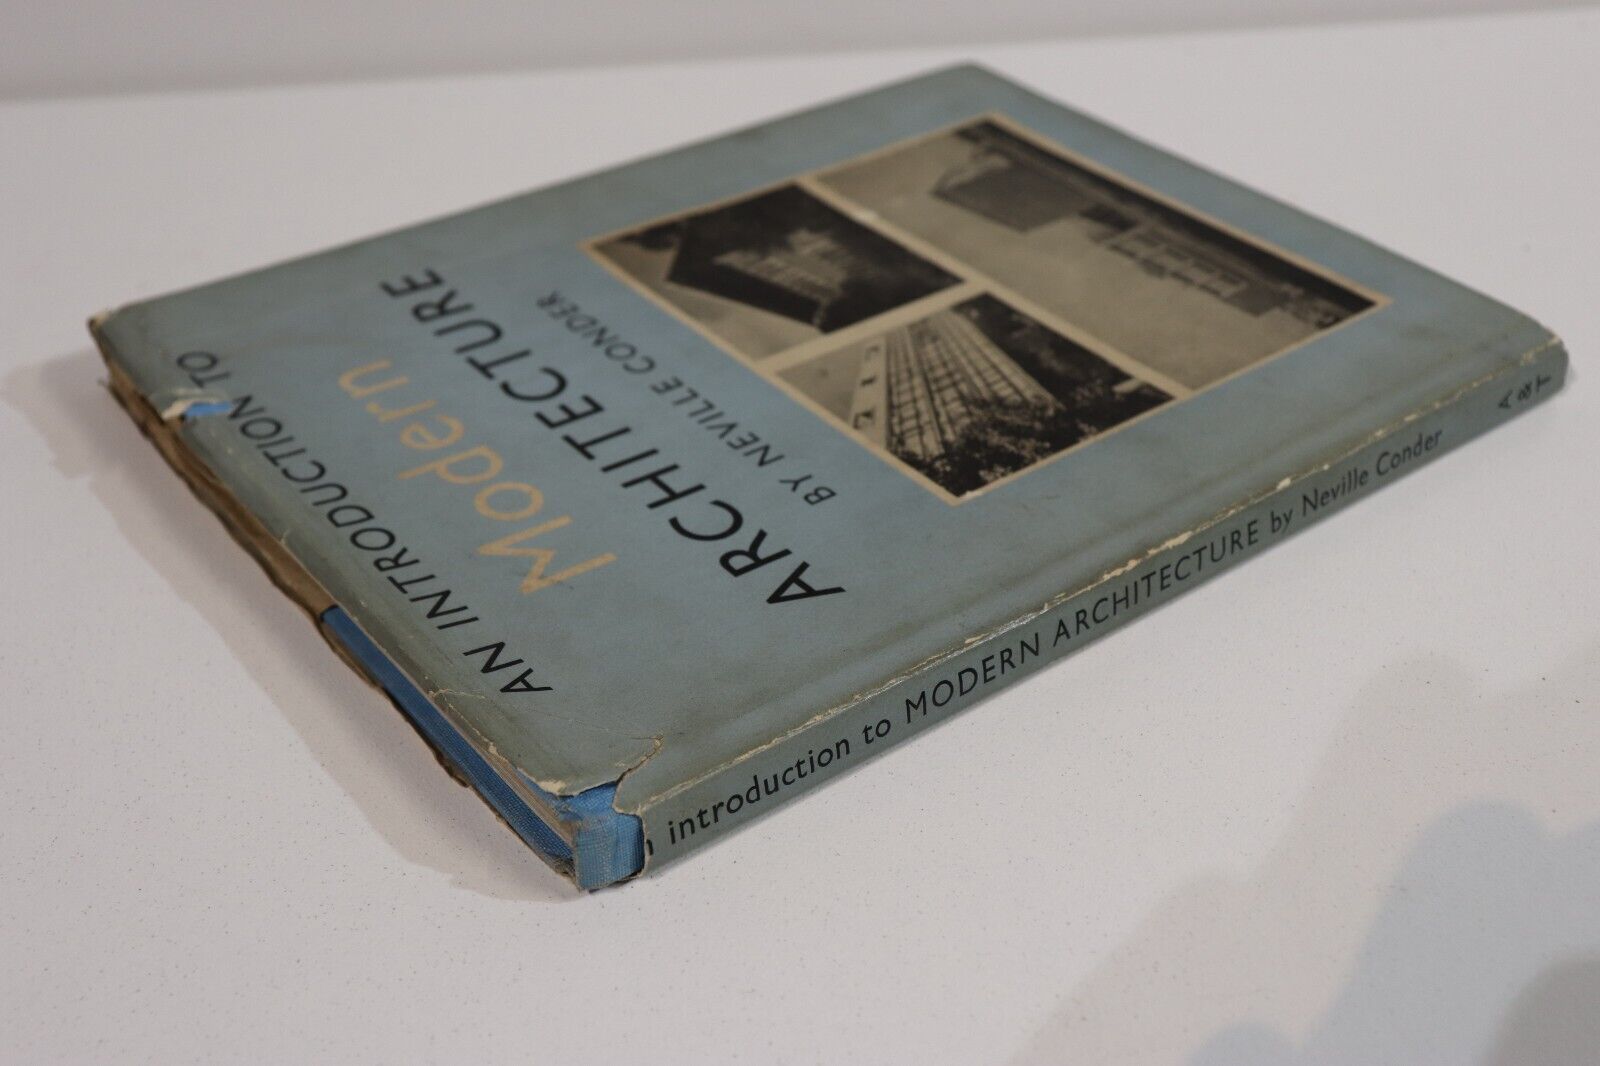 An Introduction To Modern Architecture by N. Conder - 1949 - Antique Book